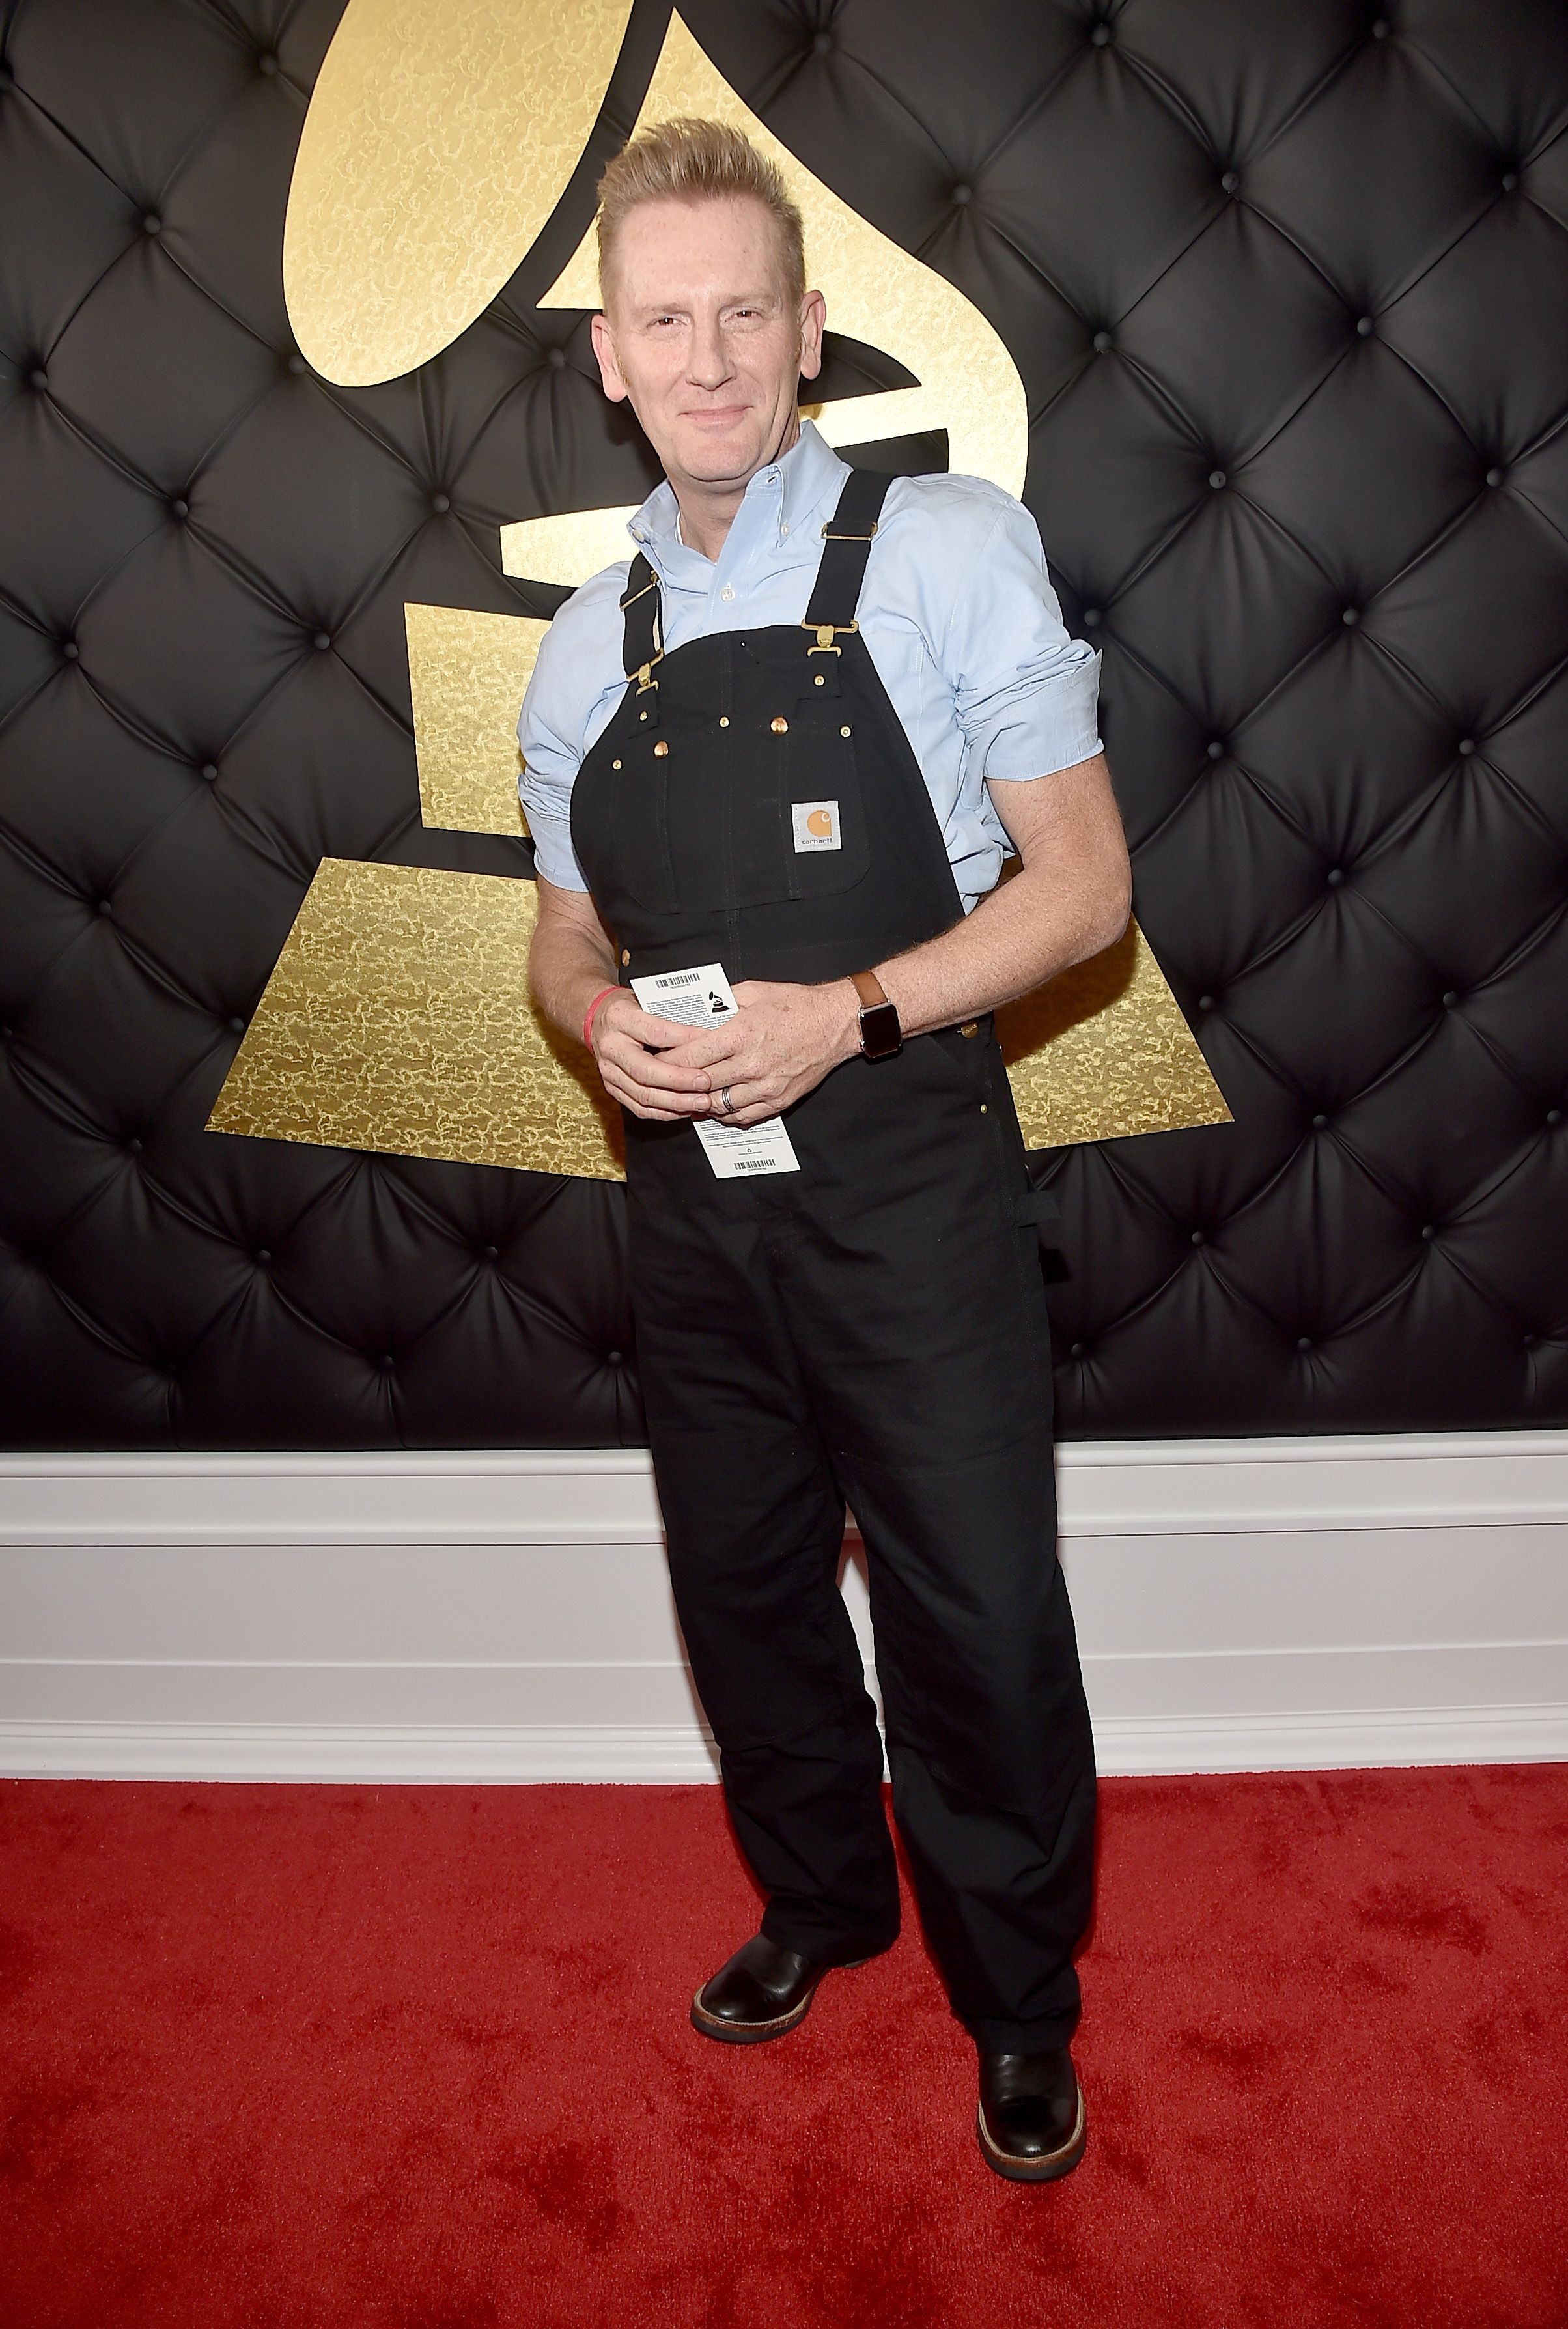 Musician Rory Lee Feek of Joey + Rory at The 59th GRAMMY Awards at STAPLES Center on February 12, 2017 | Photo: Getty Images